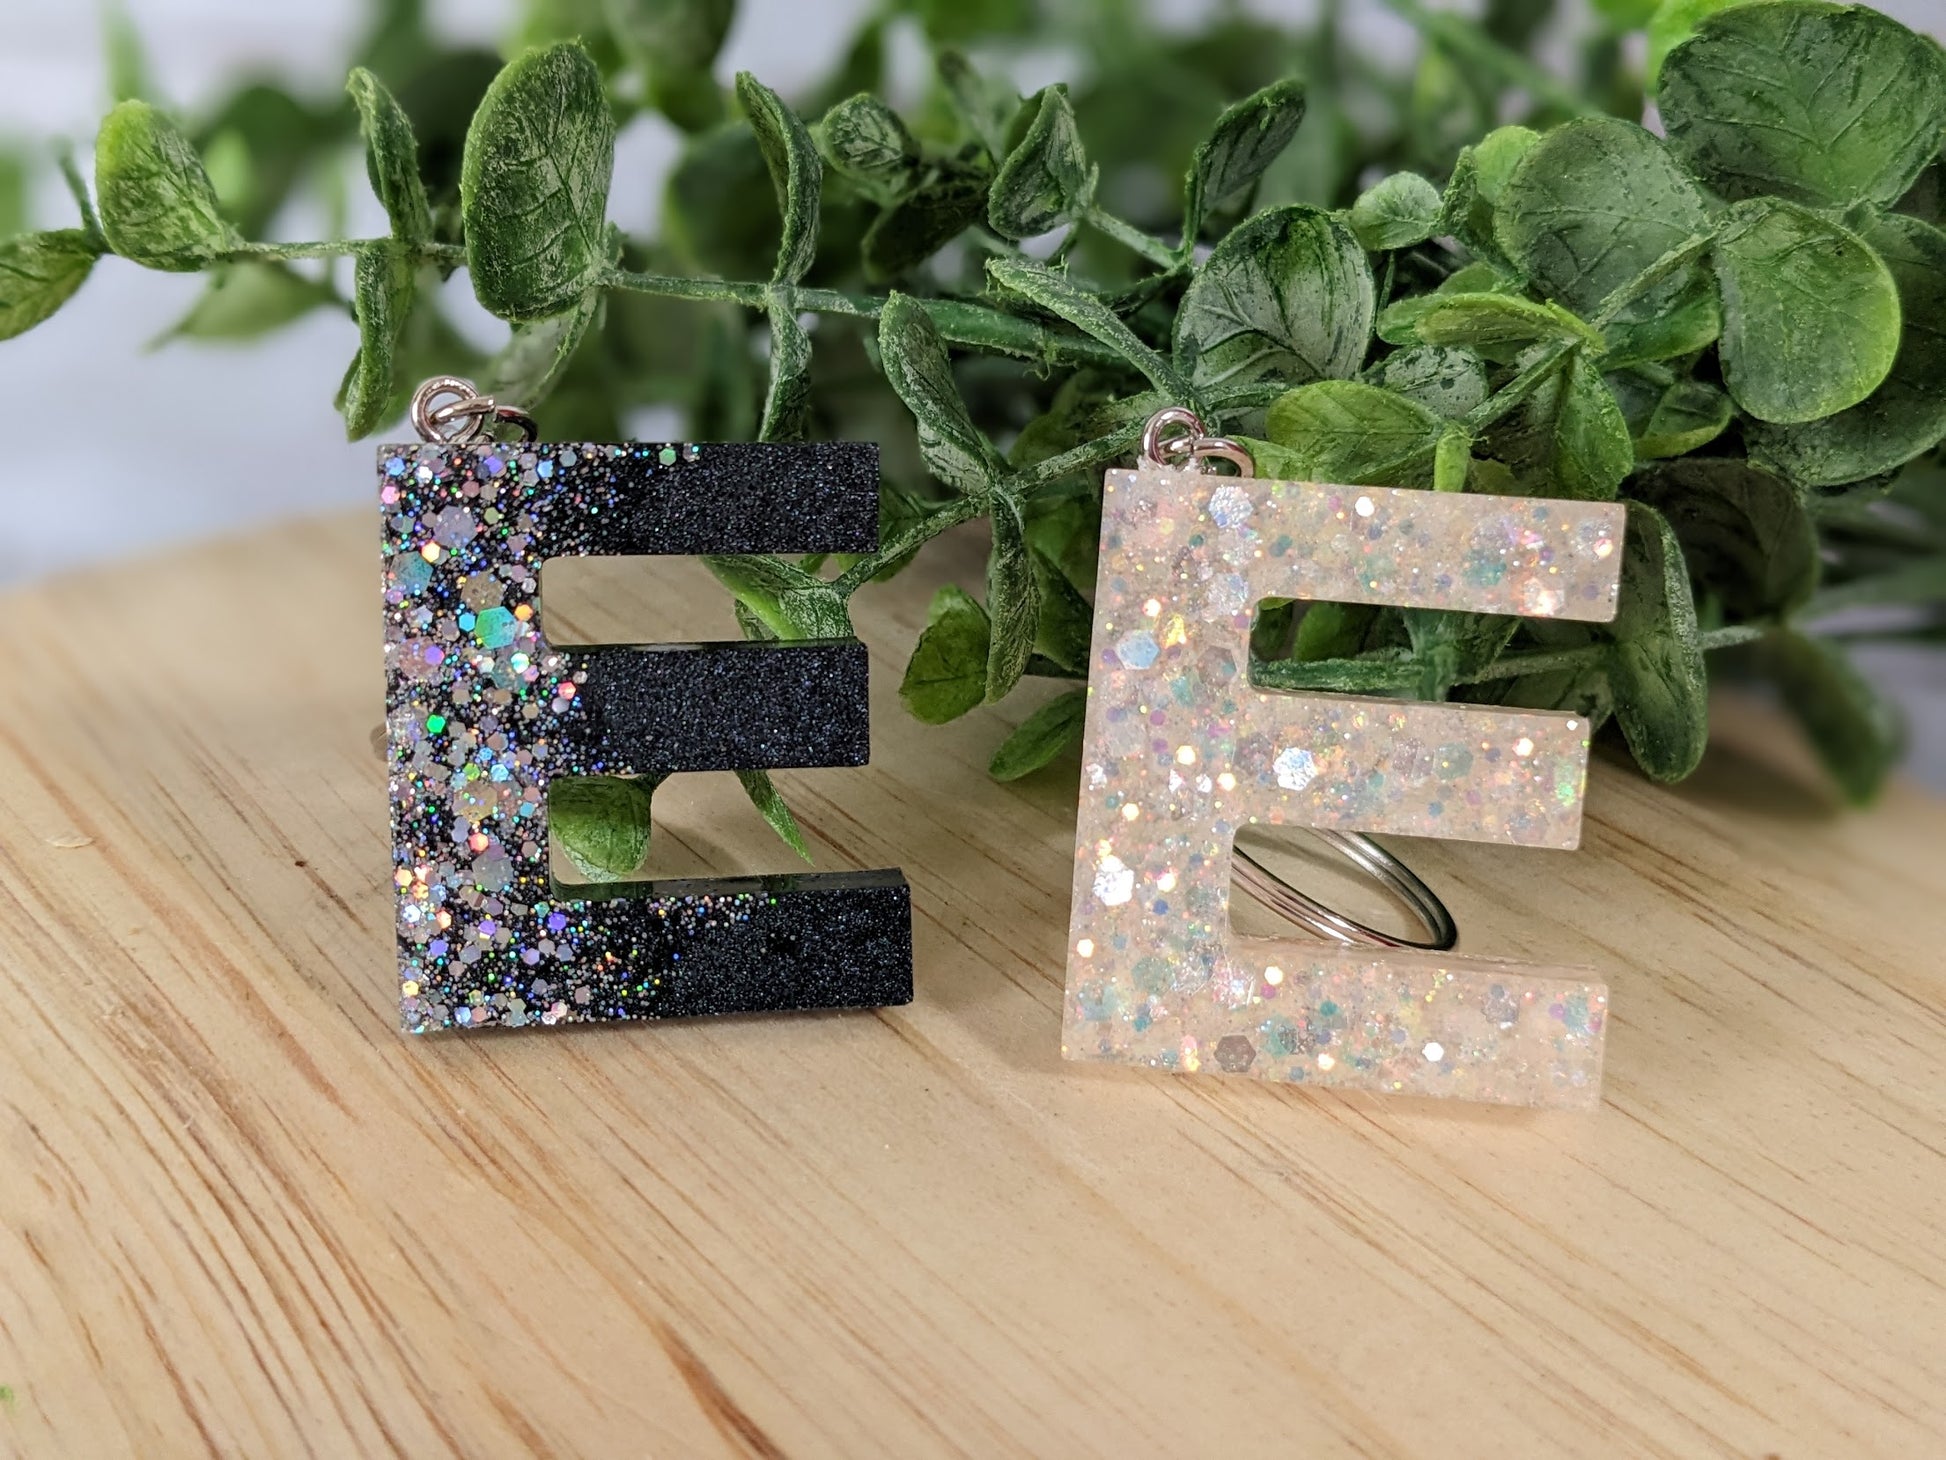 E - Letter - Initial Resin Keychain – Crafty Angel Art